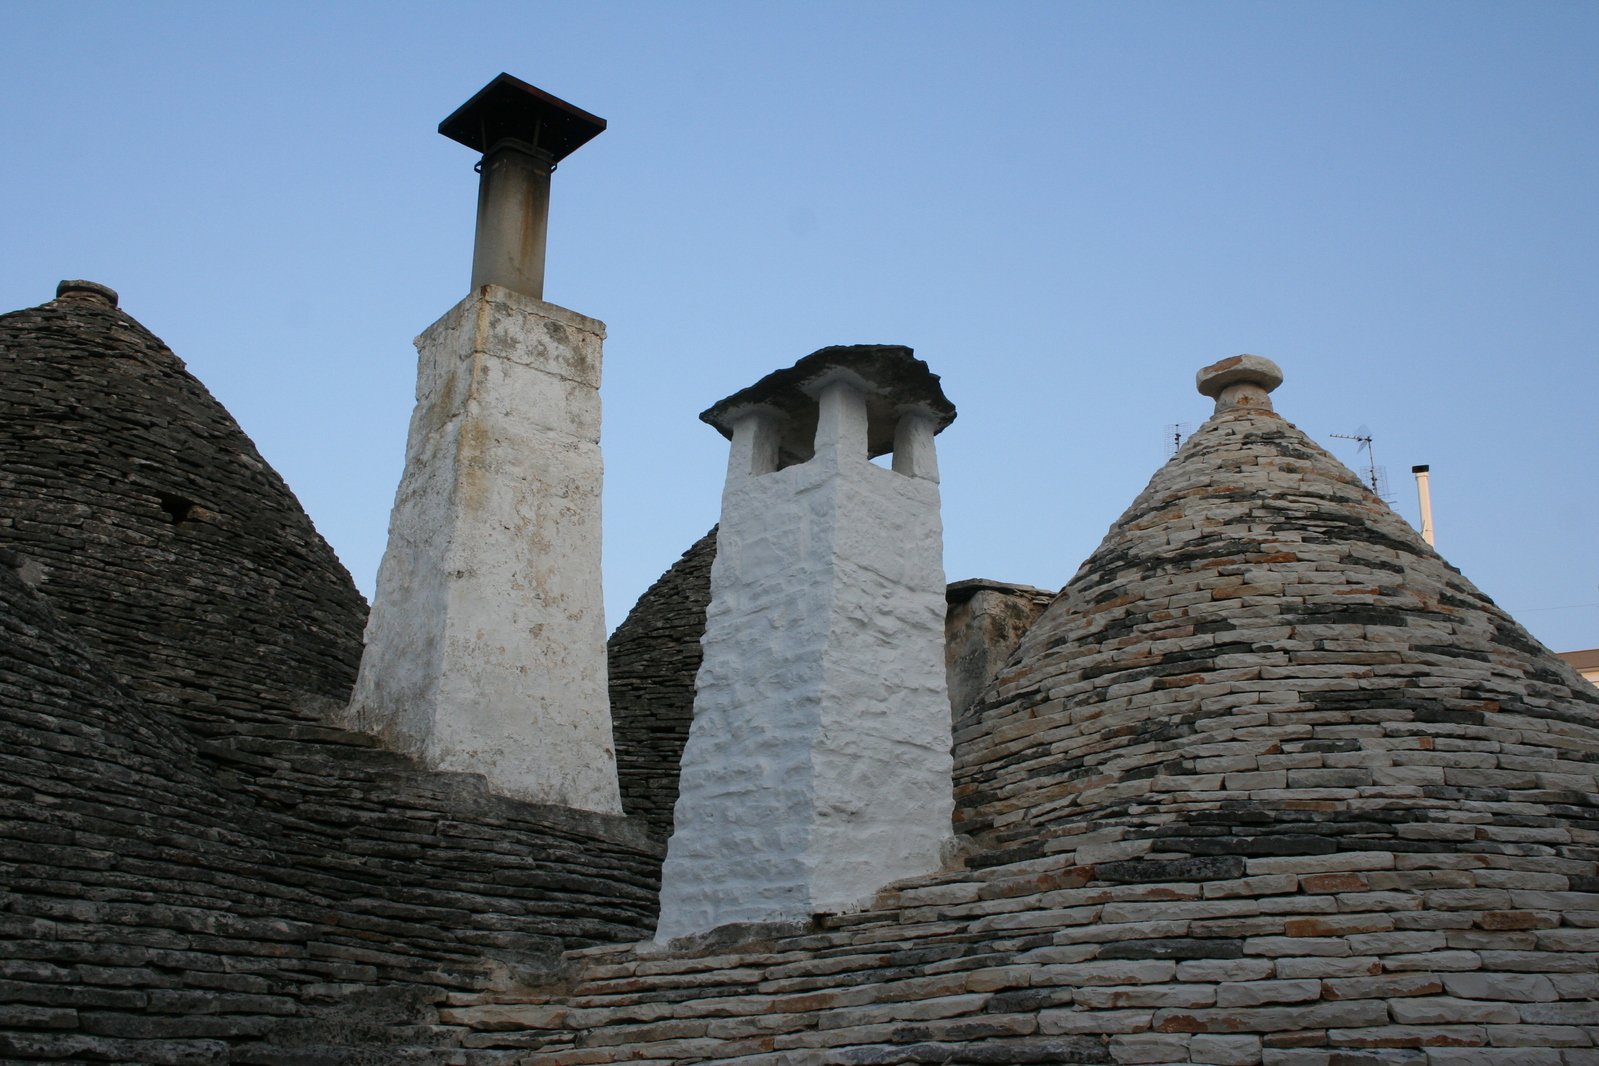 this is a po of two old chimneys on stone walls